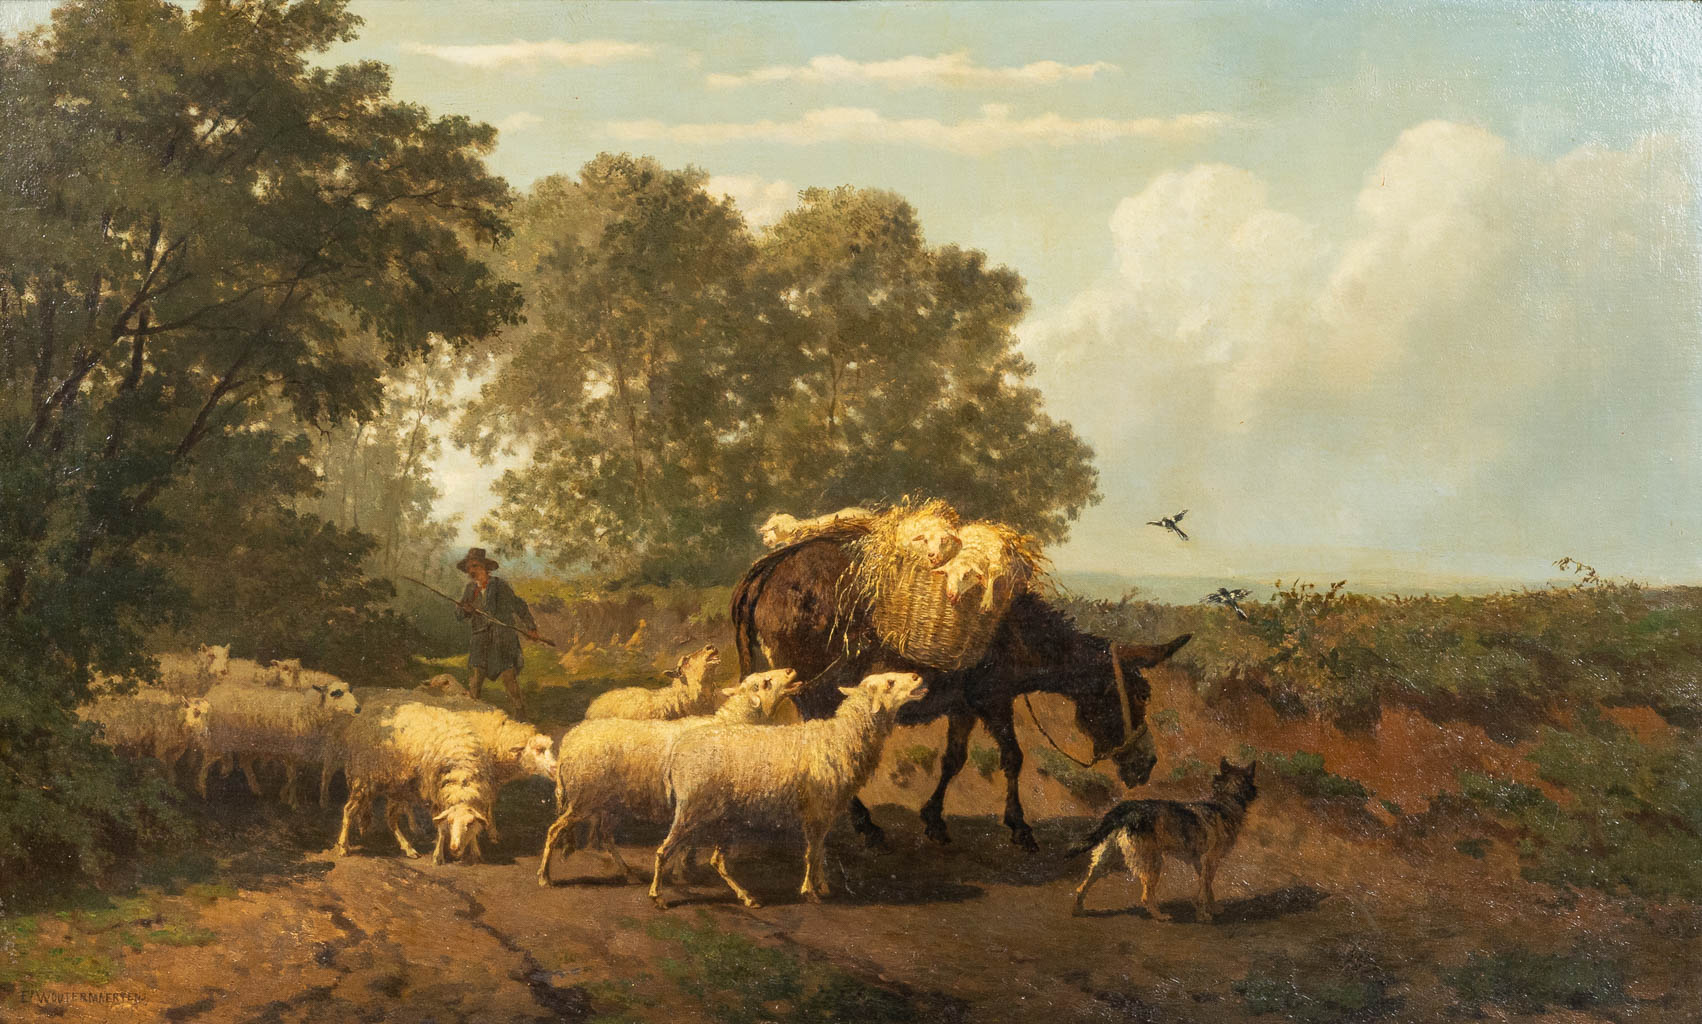 Edouard WOUTERMAERTENS (1819-1897) 'Sheep herer with a donkey' a painting, oil on canvas. (128 x 77 cm)